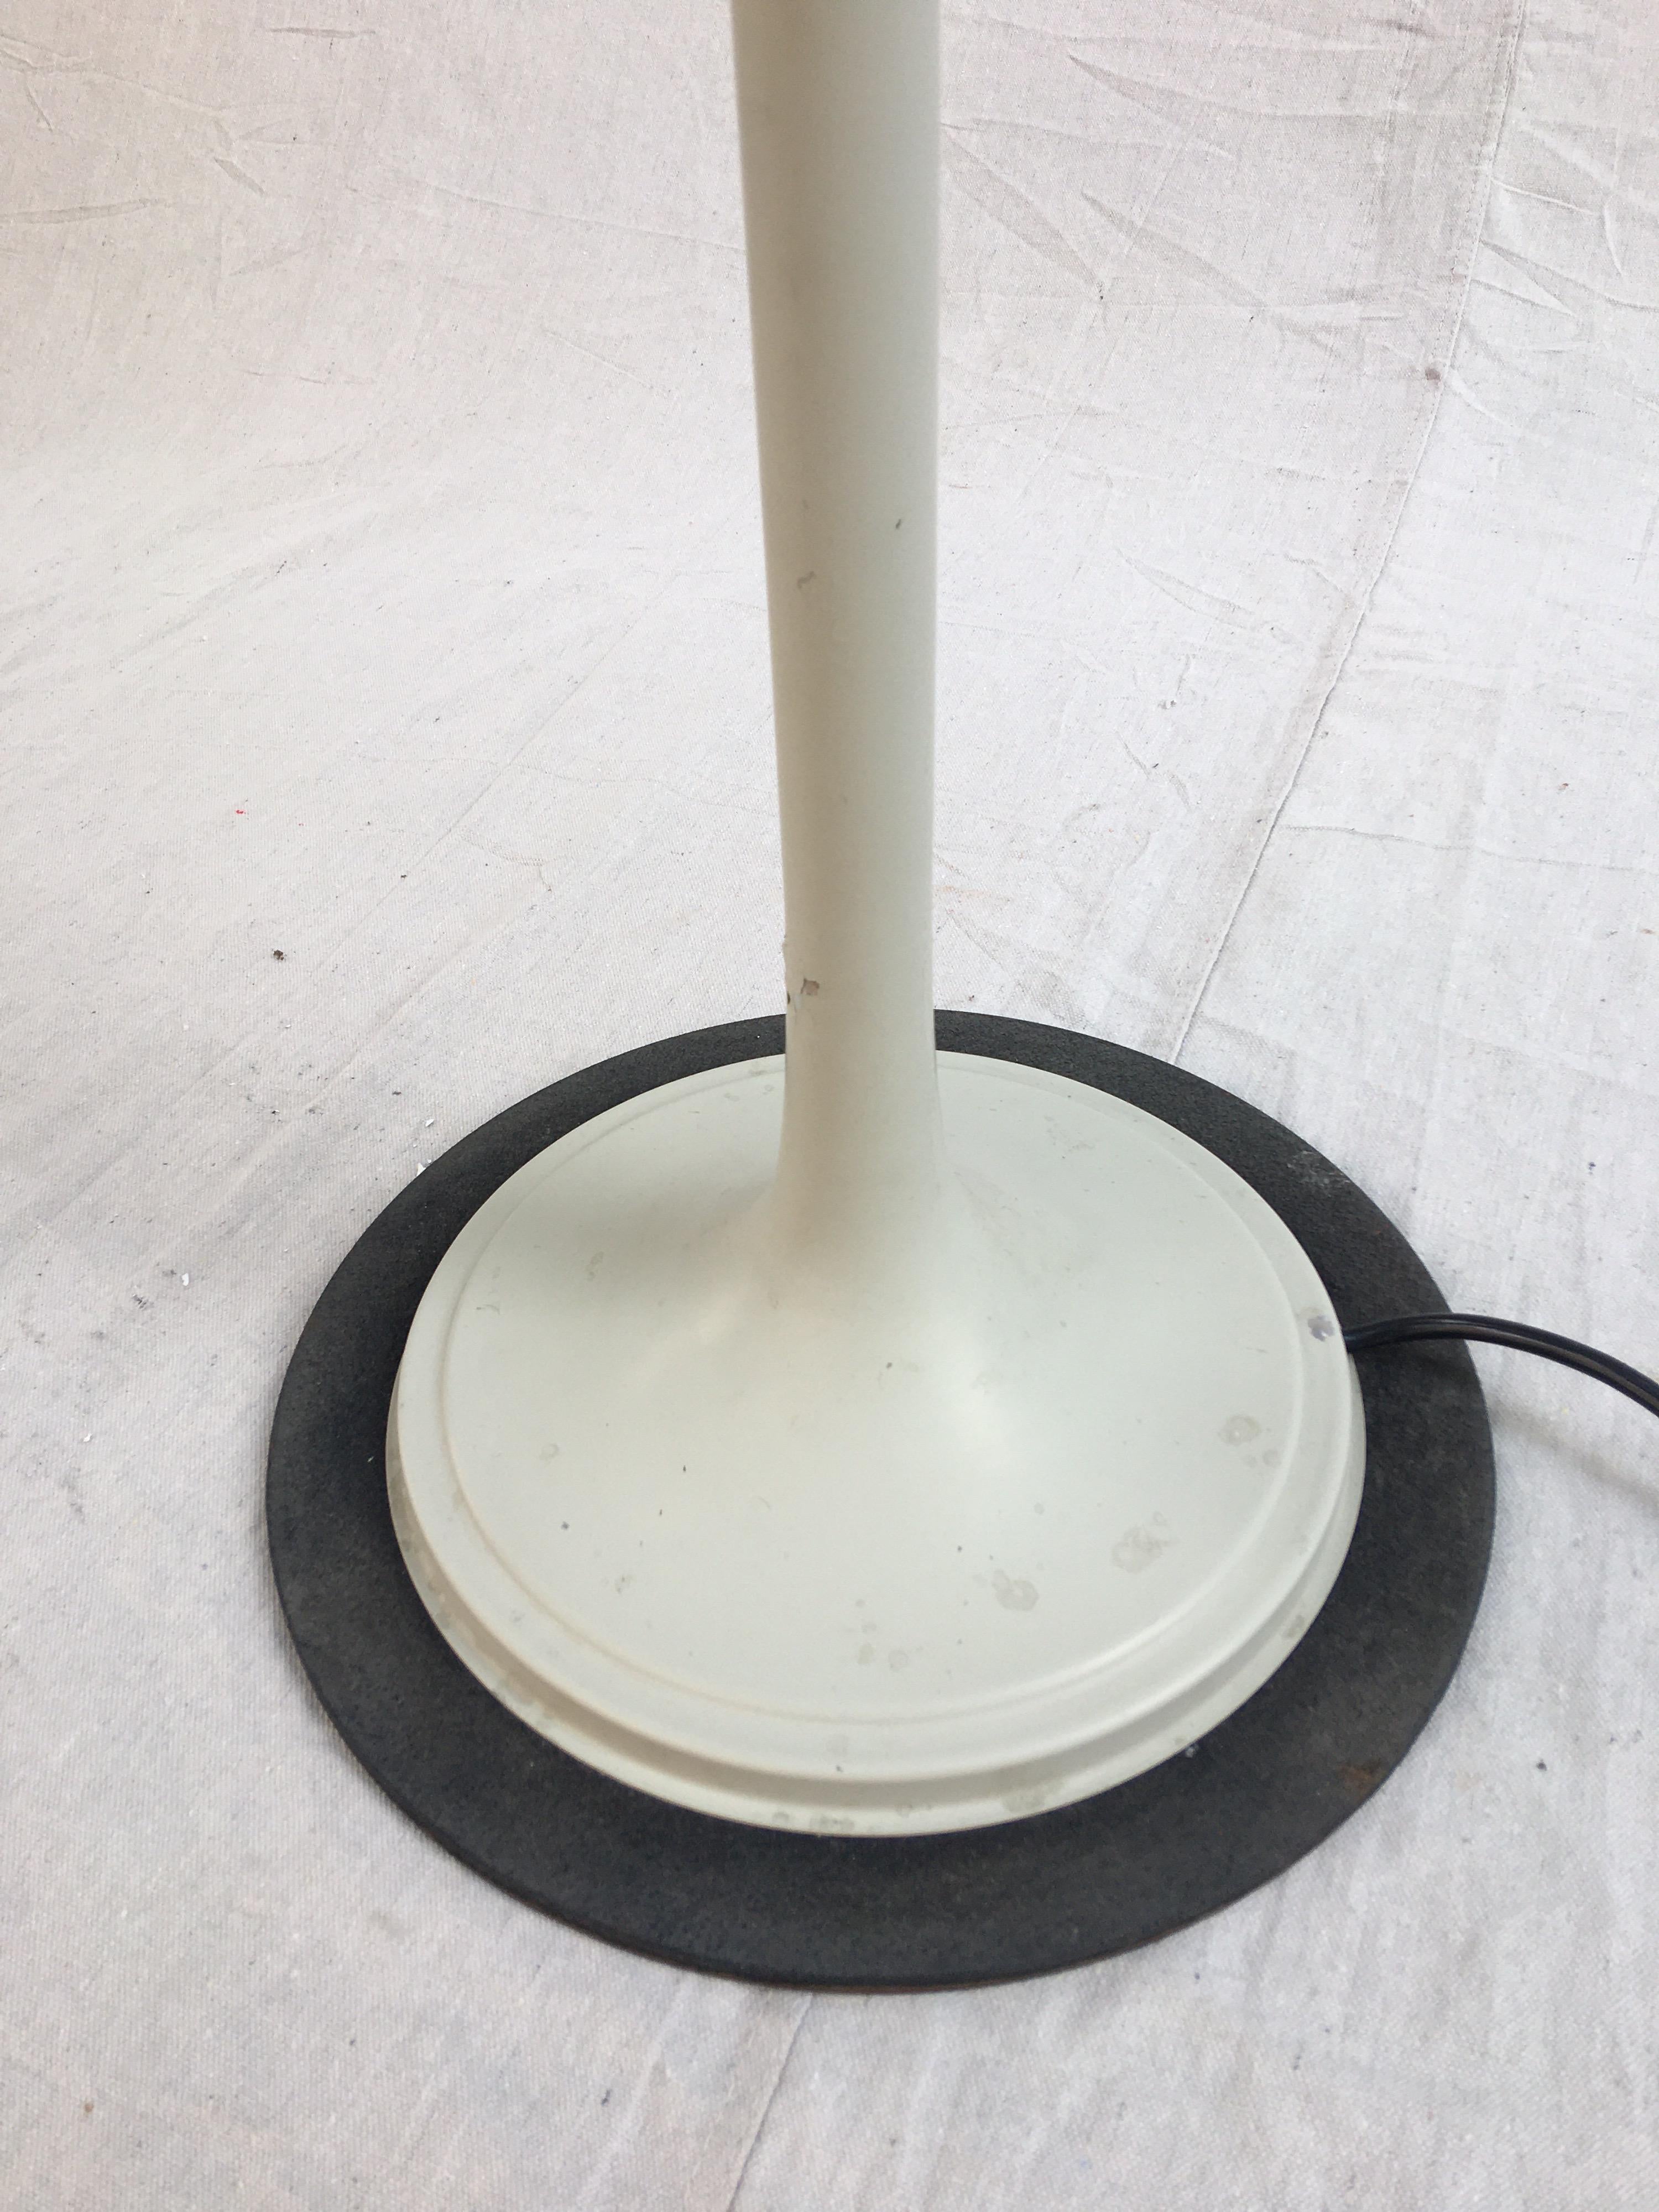 Gino Sarfatti for Arteluce Monumental Floor Lamp Model 1094 from 1966 In Good Condition In Philadelphia, PA